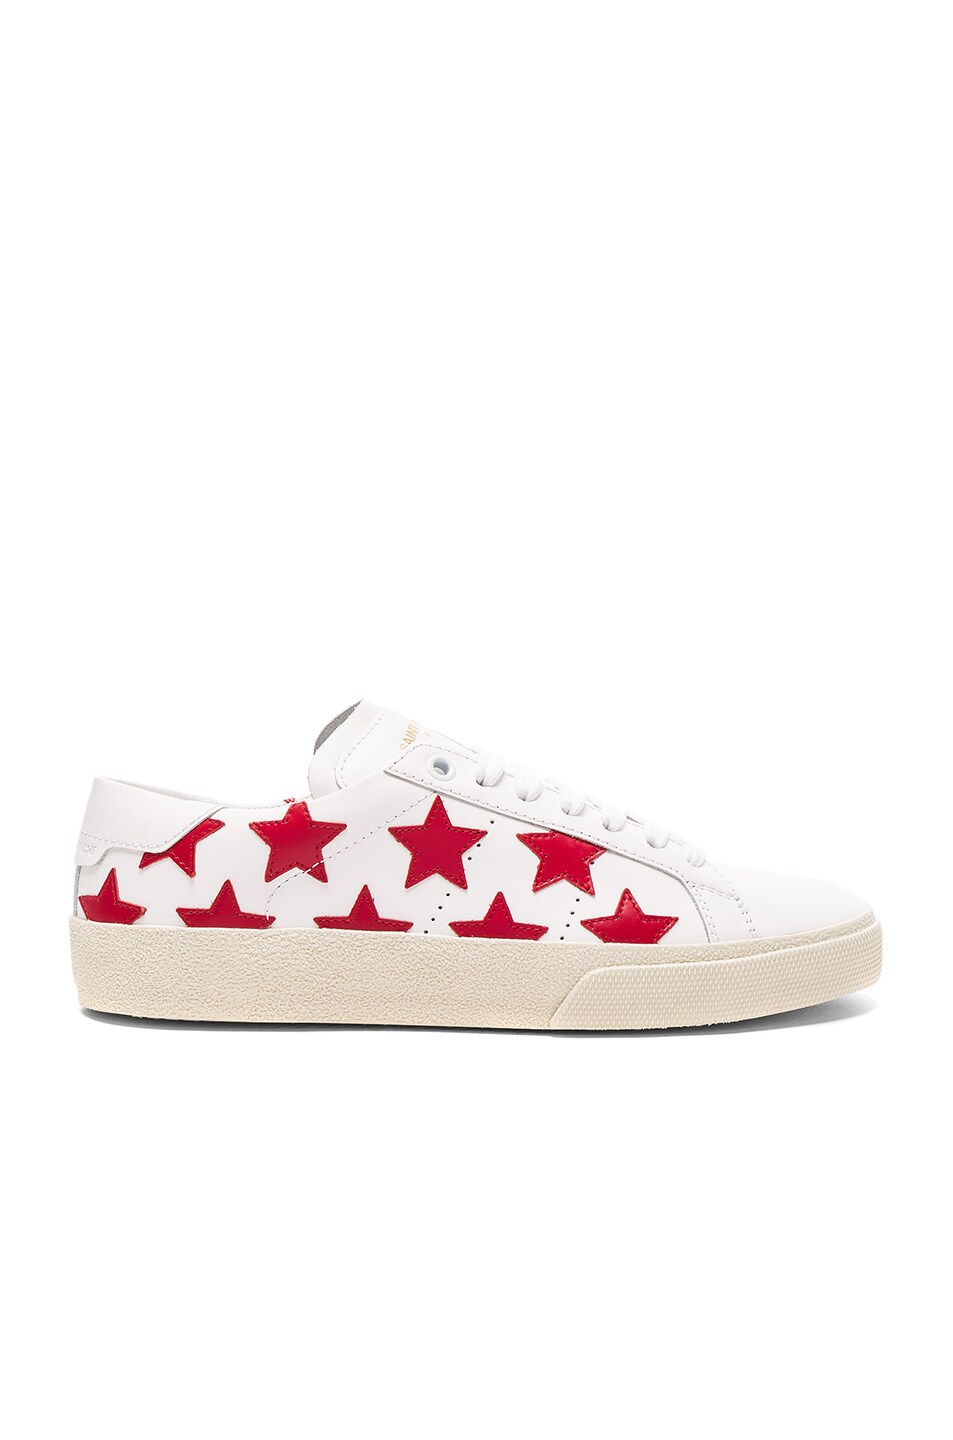 Image 1 of Saint Laurent Court Classic Leather Sneakers in Rouge & White